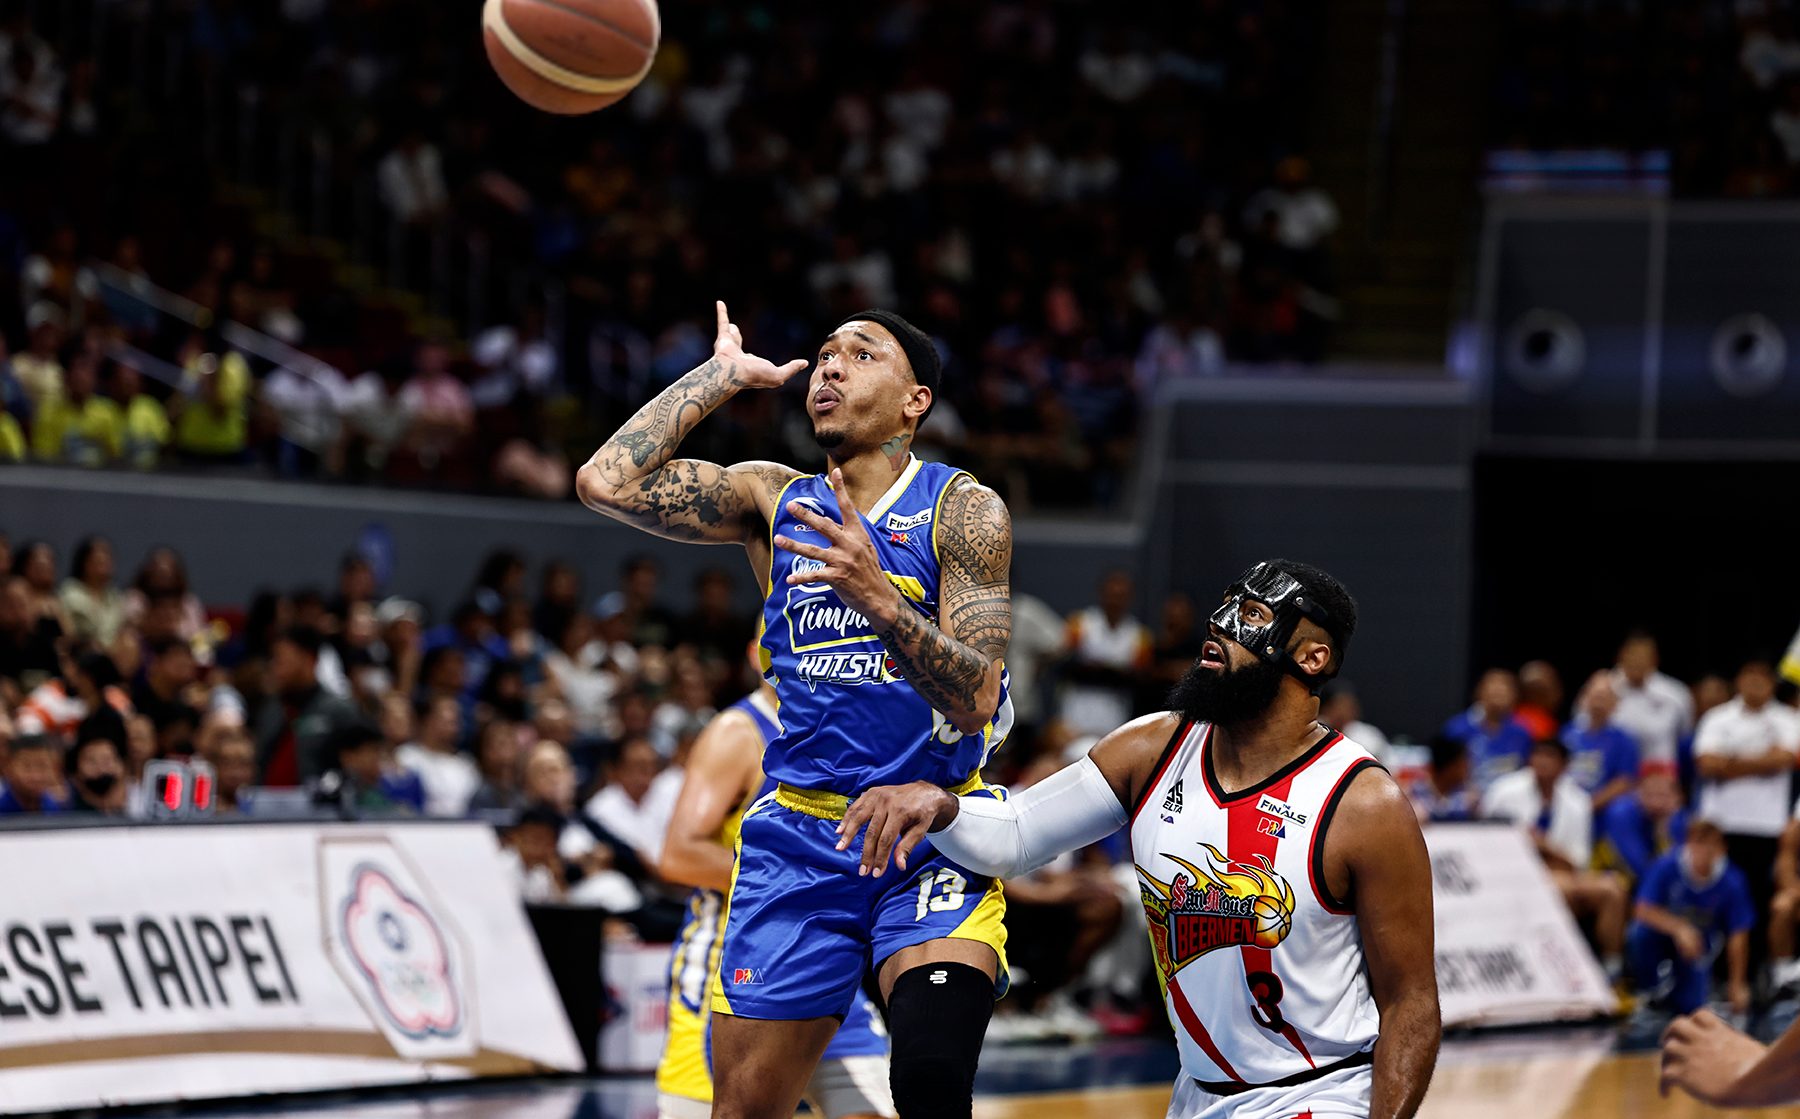 Fiery Abueva coughs up P100,000 fine for disability jab on SMB’s Gallent, evades Game 3 ban